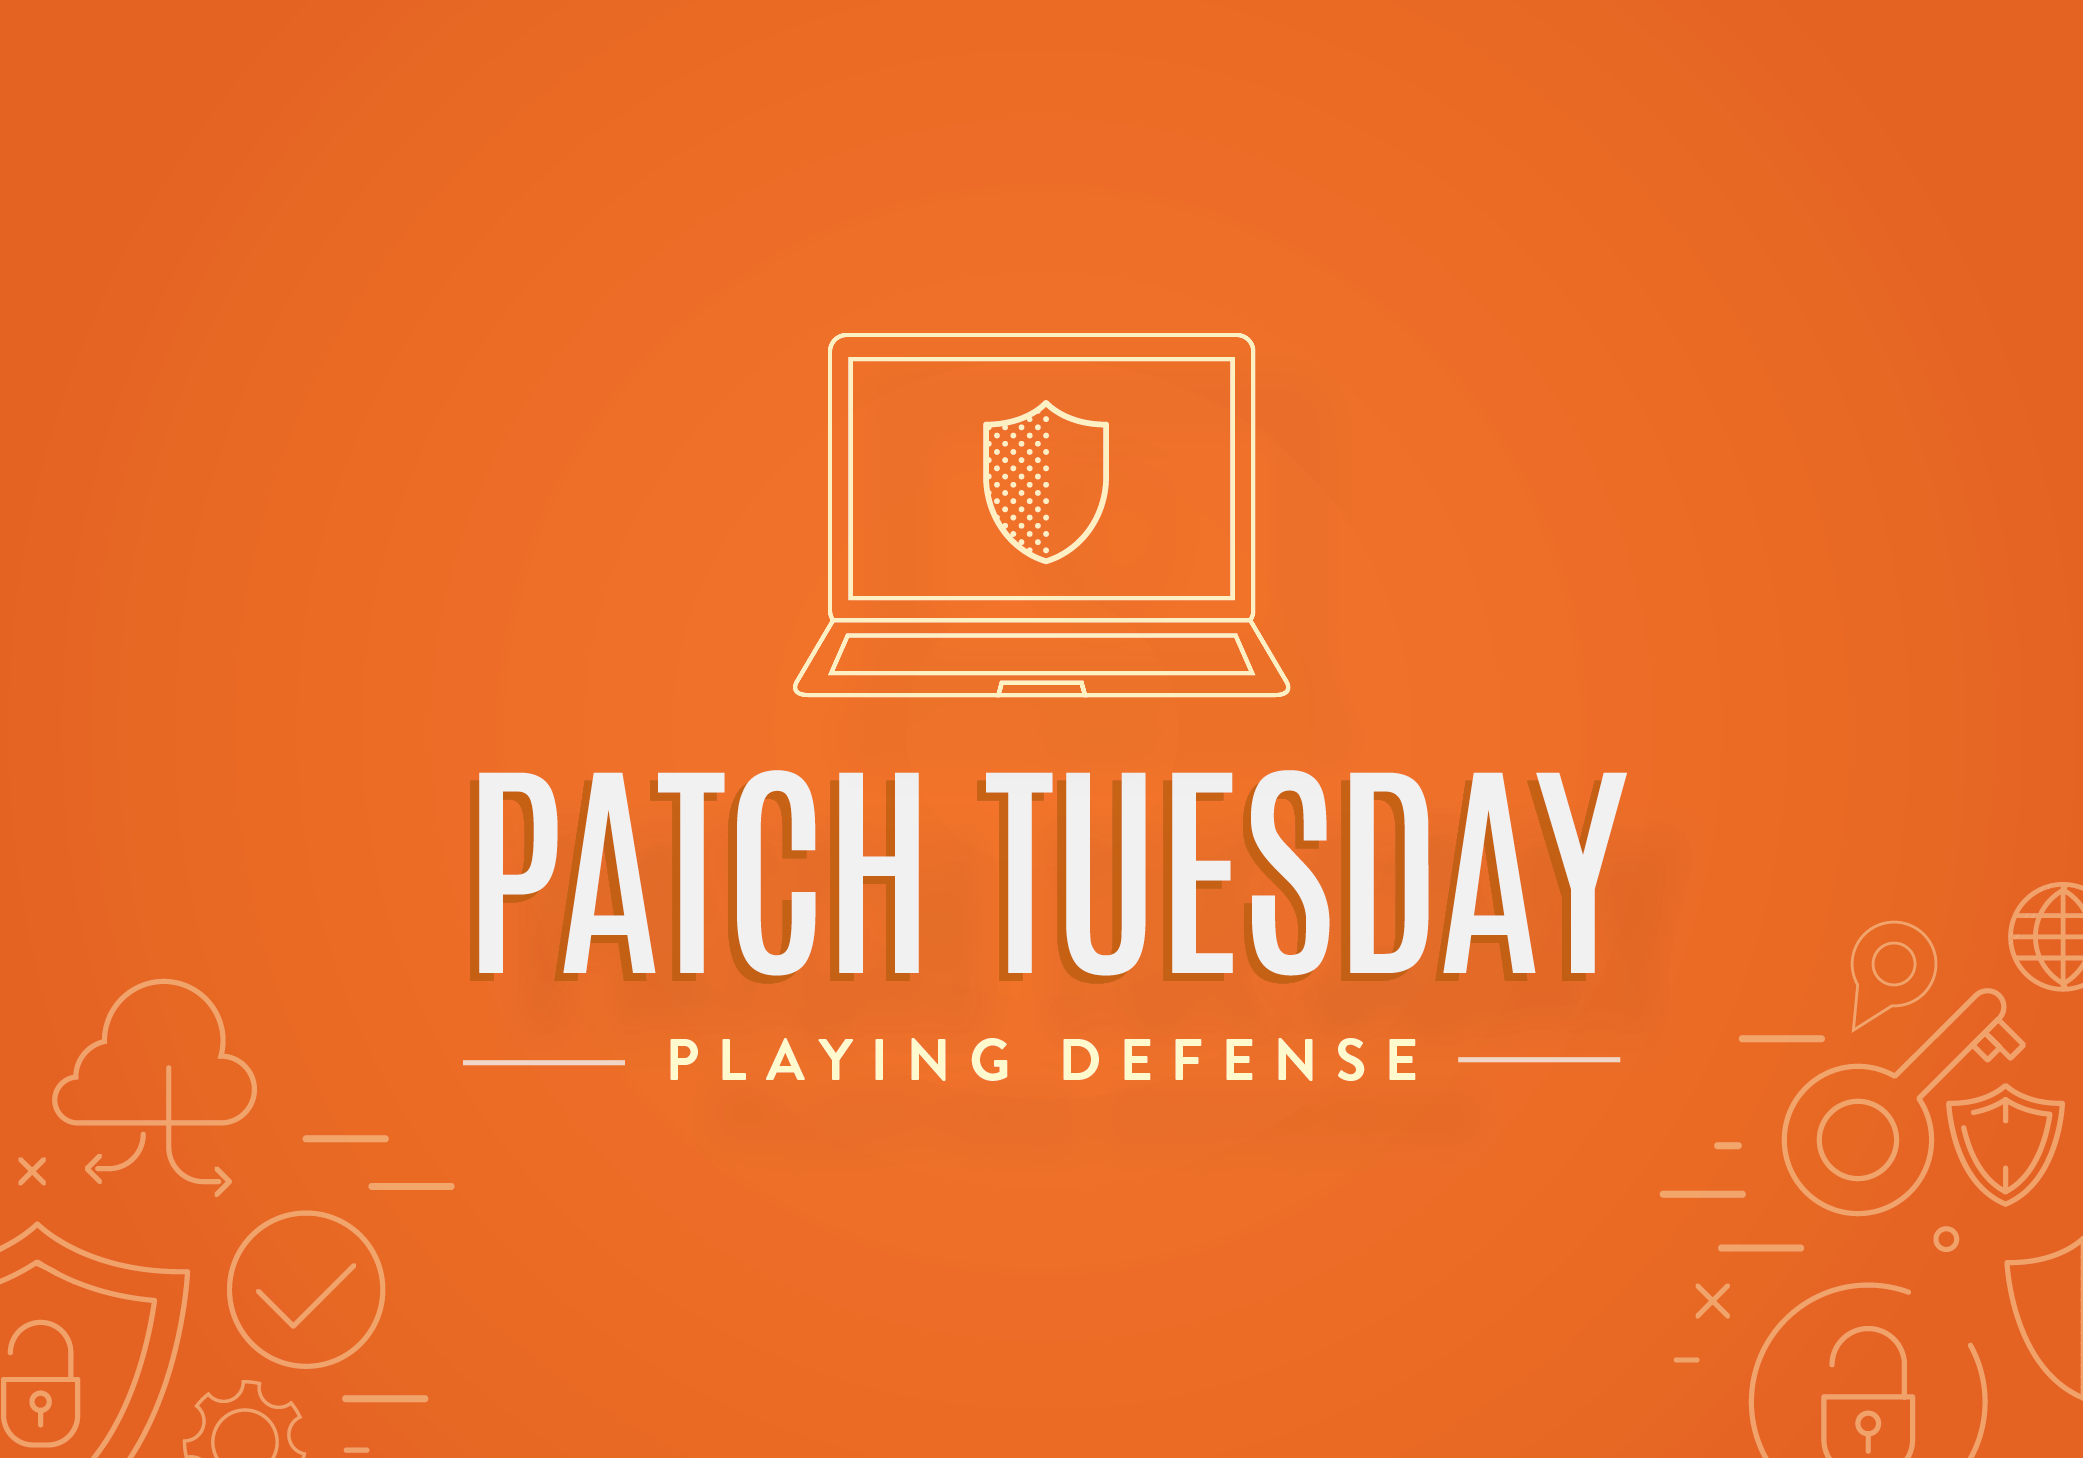 May Patch Tuesday: Playing Defense